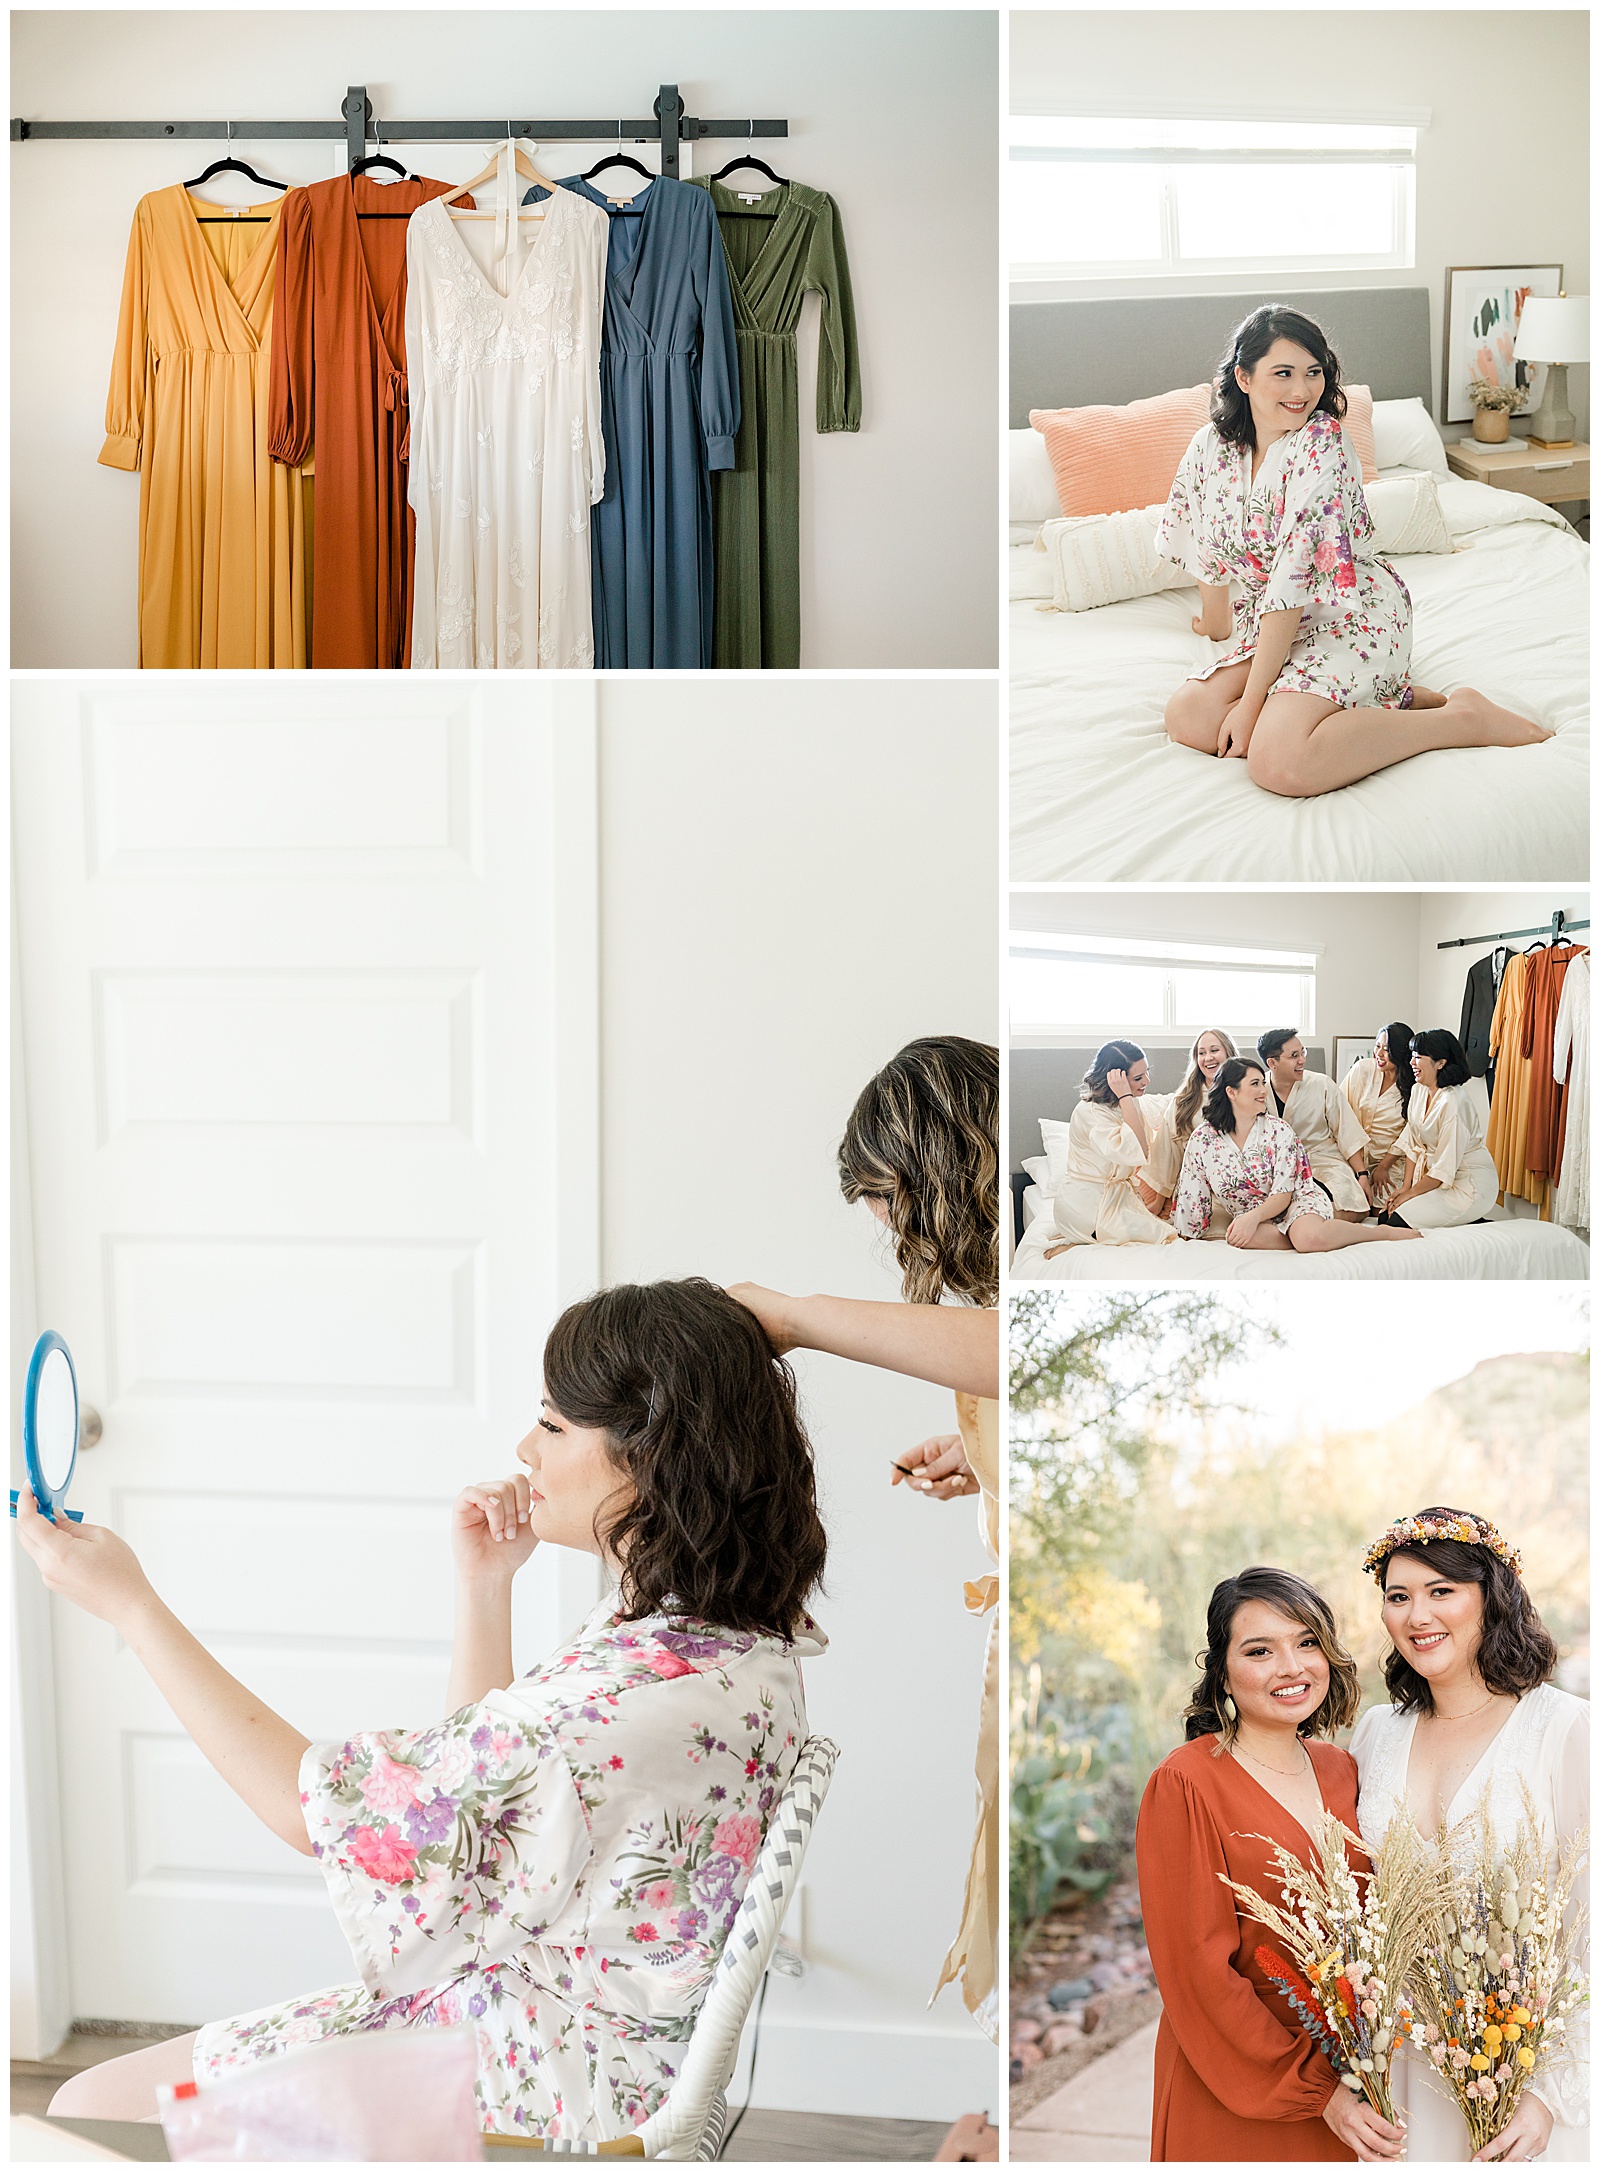 Wedding photographer in Phoenix shows detail images of a bride getting ready.